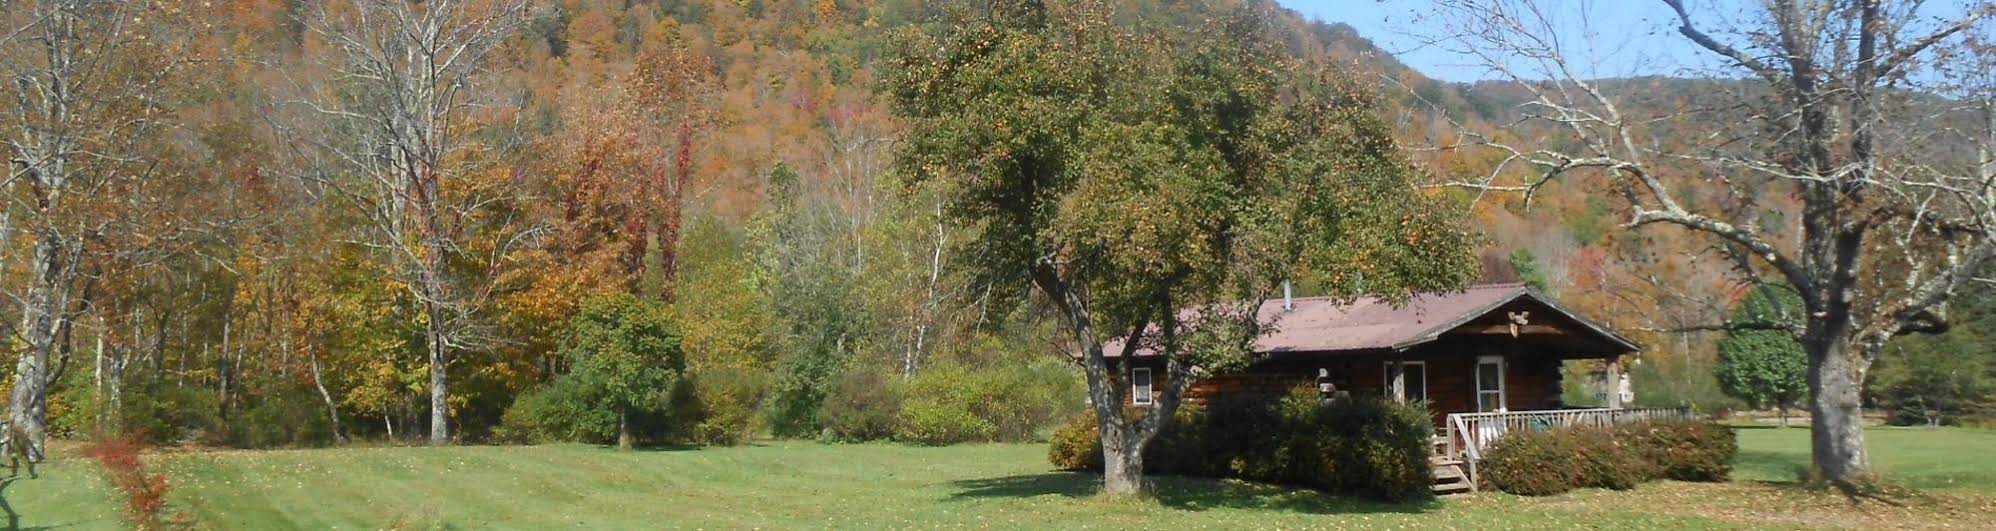 Cold Spring Lodge & Cabins